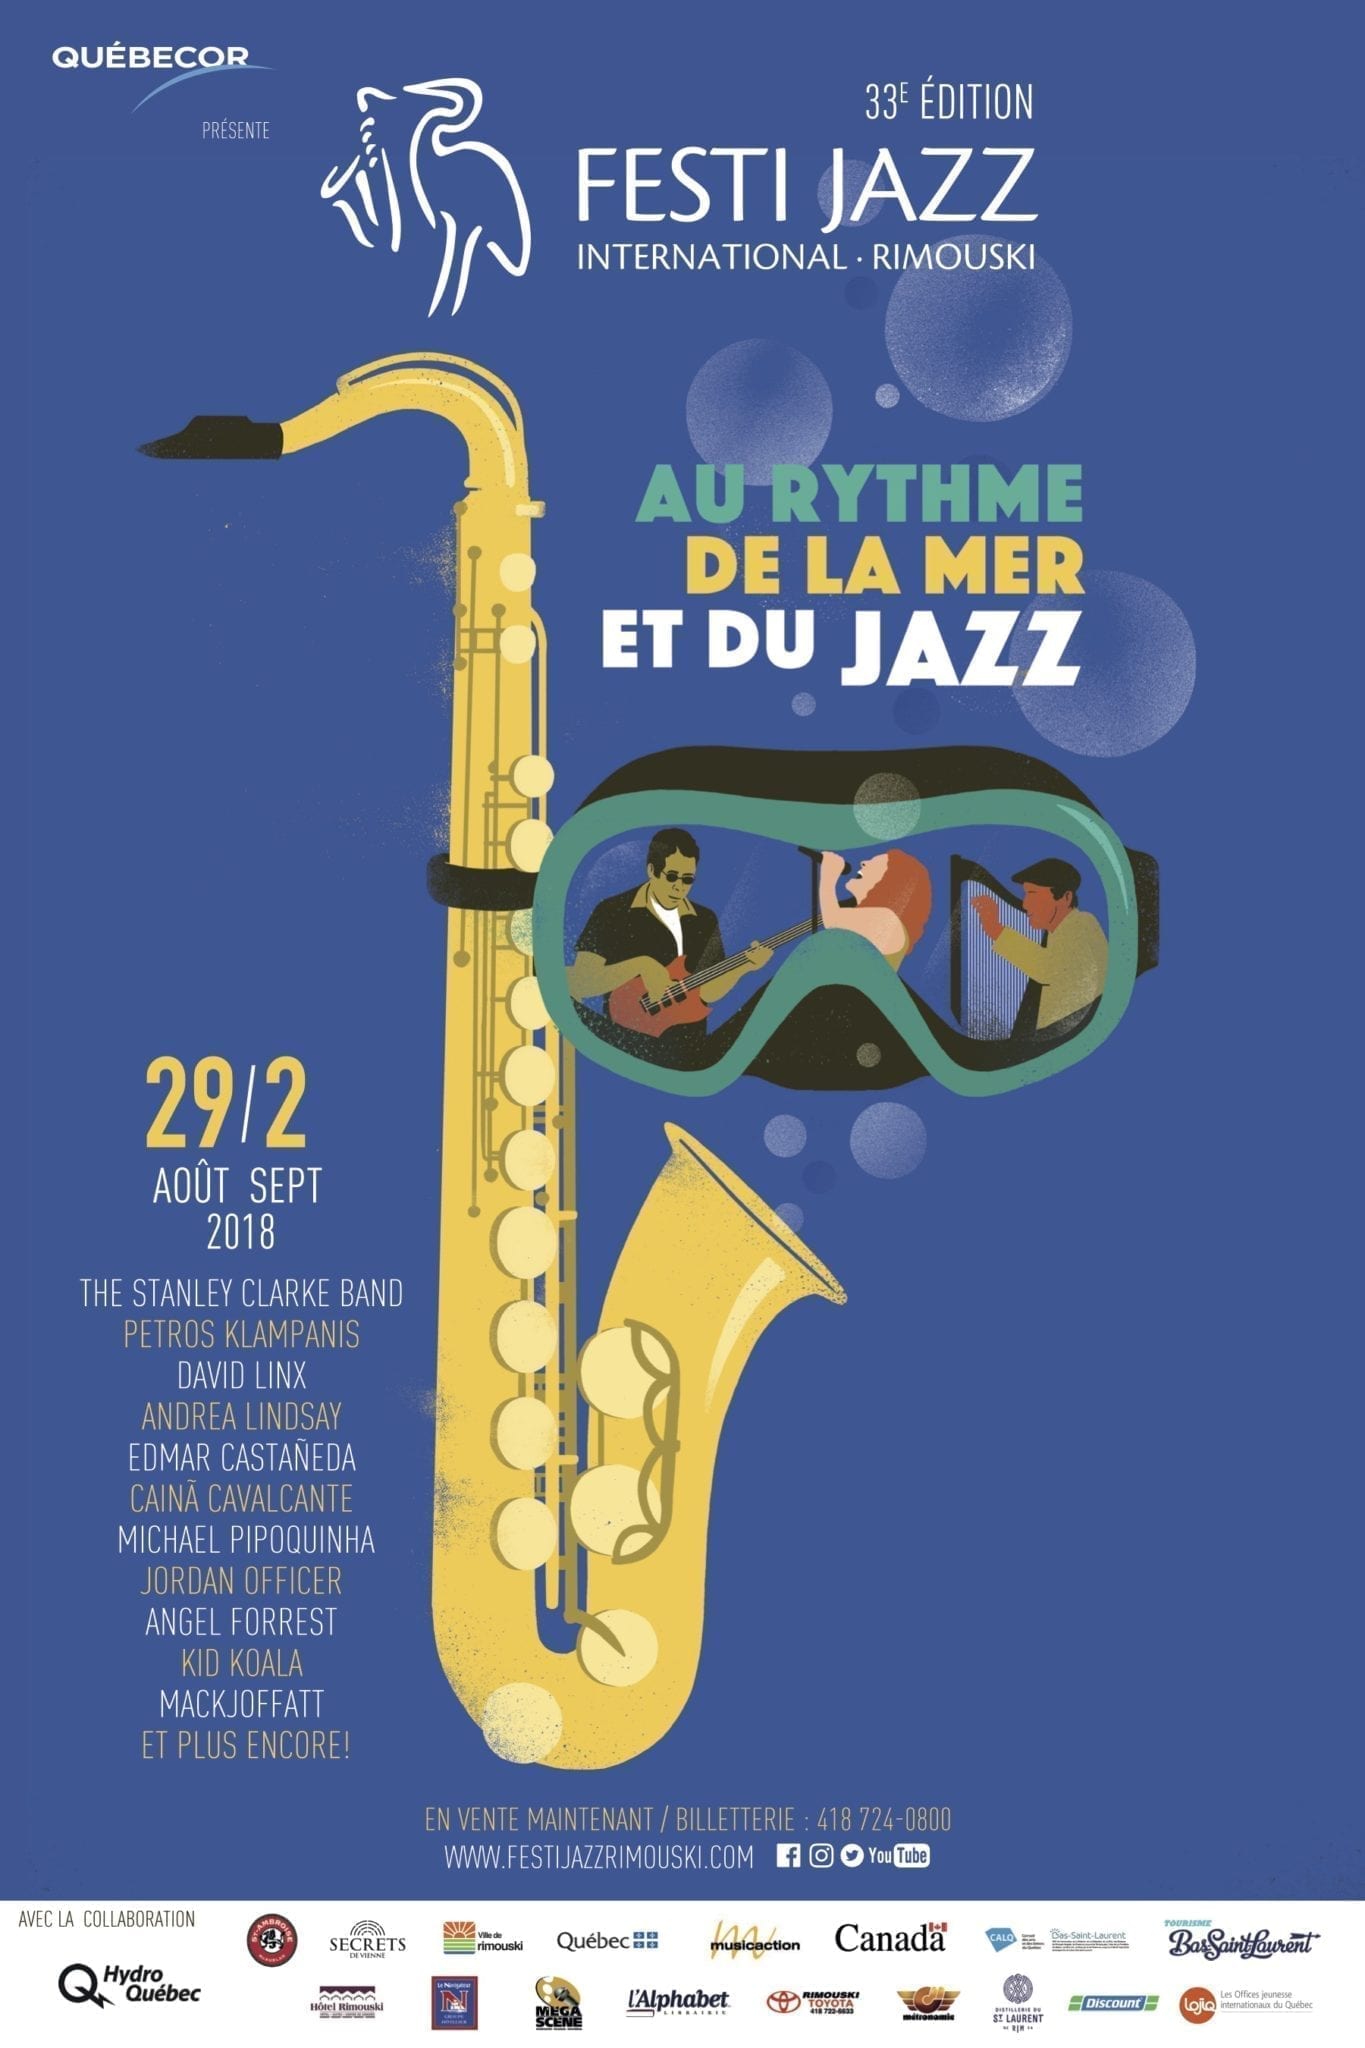 Previous editions of the Festi Jazz